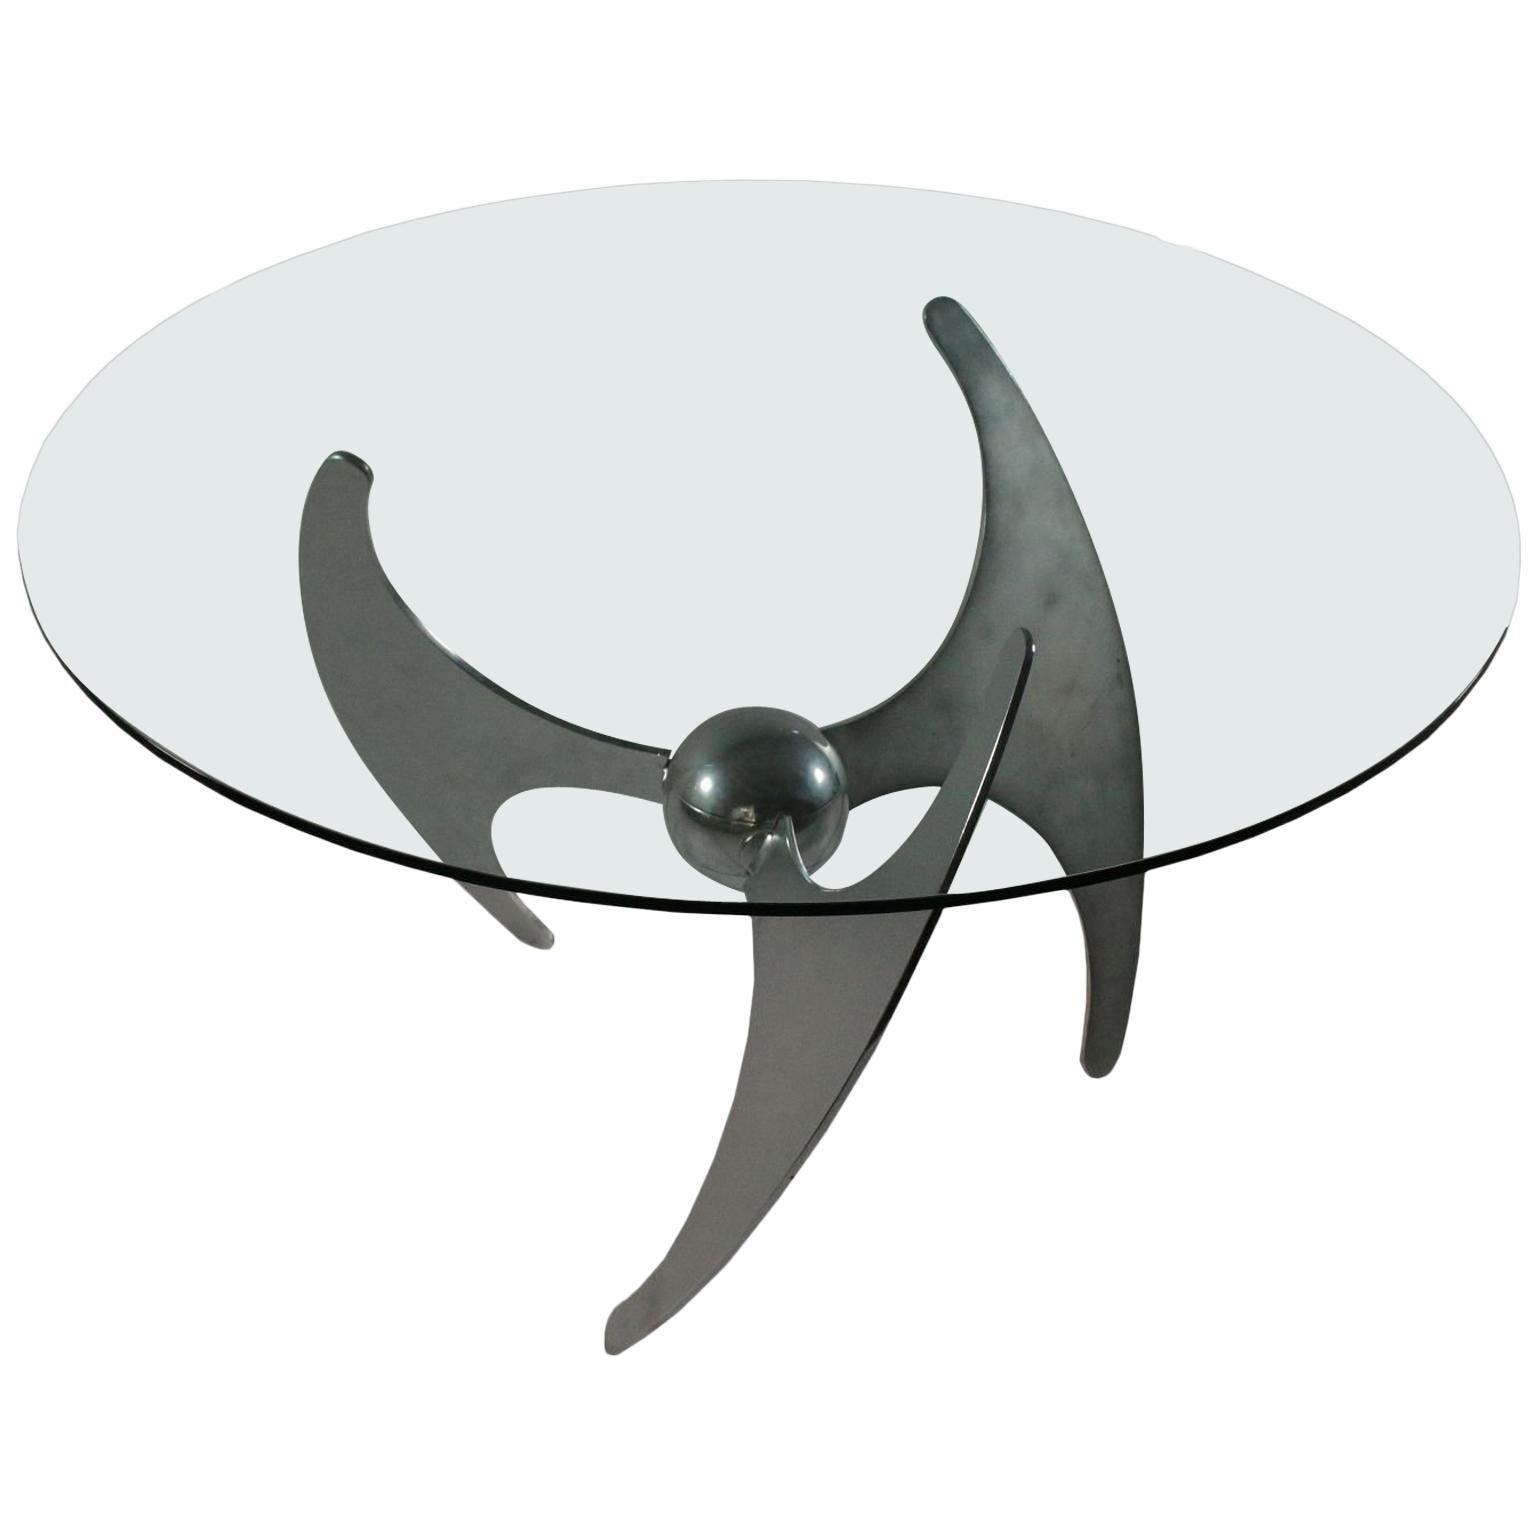 Table by Luciano Campanini Chromed Metal Glass Vintage, Italy, 1970s